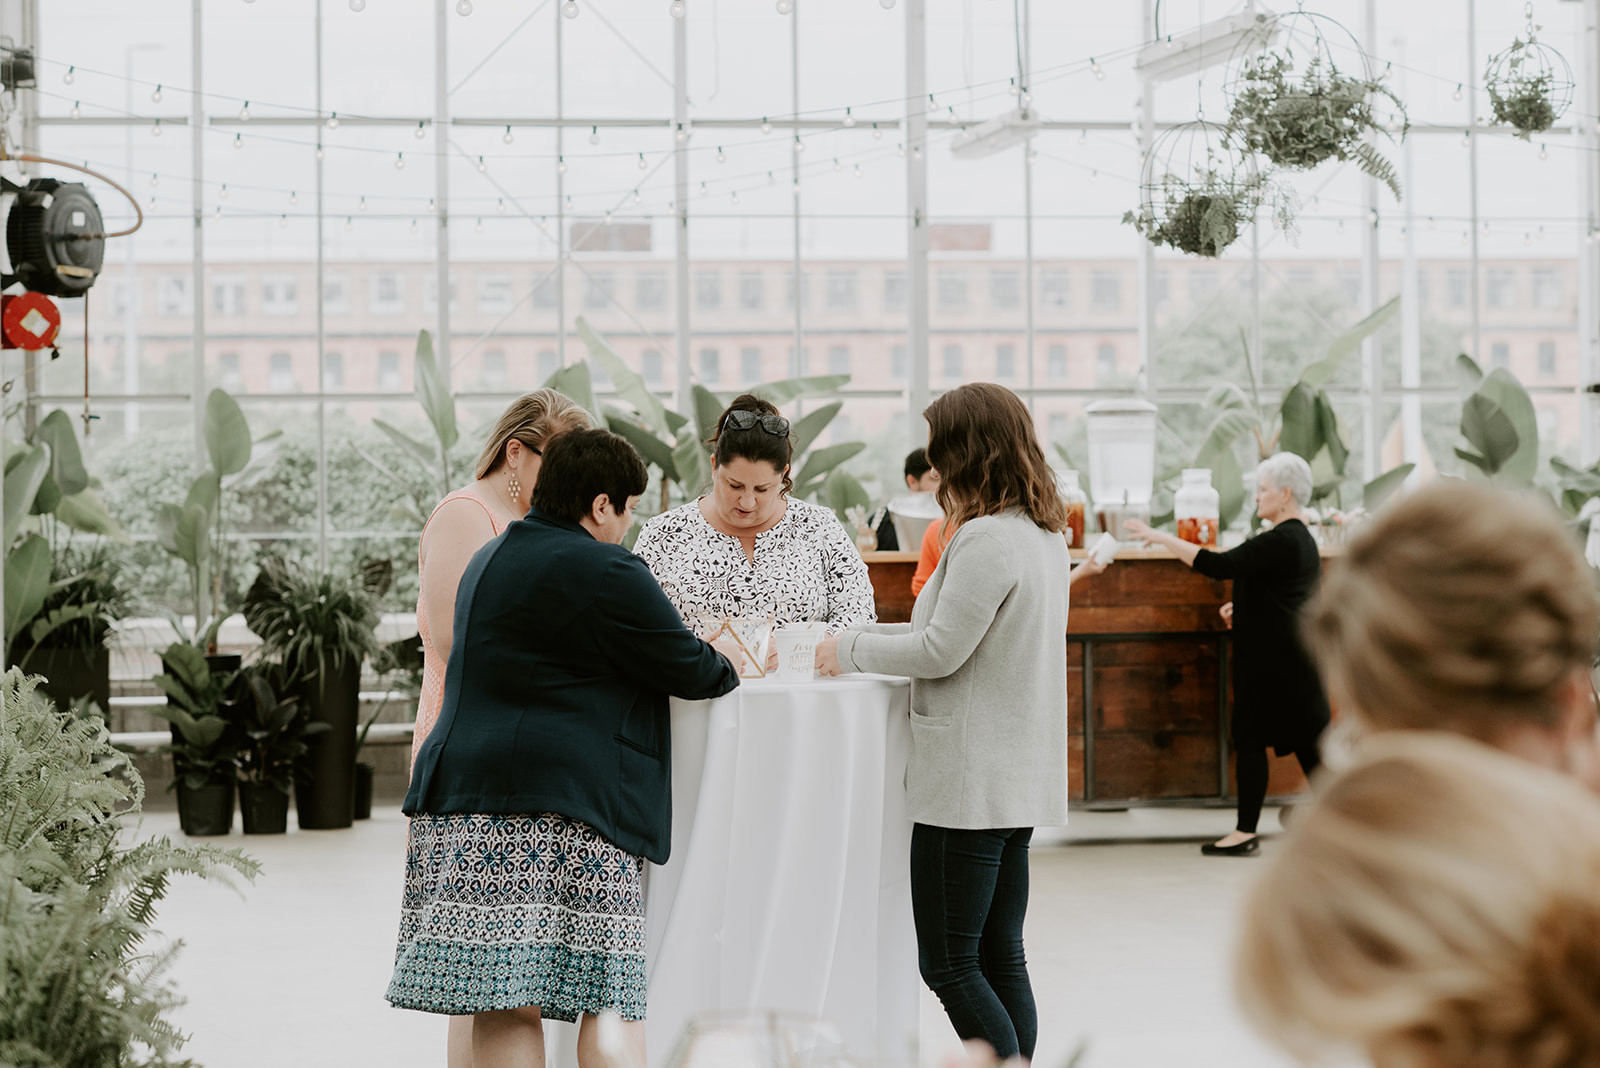 JS Weddings and Events Grand Rapids Wedding Planner and Floral Designer - Whimsical Garden Romantic Kate Spade Bridal Shower Greenhouse at the Downtown Market